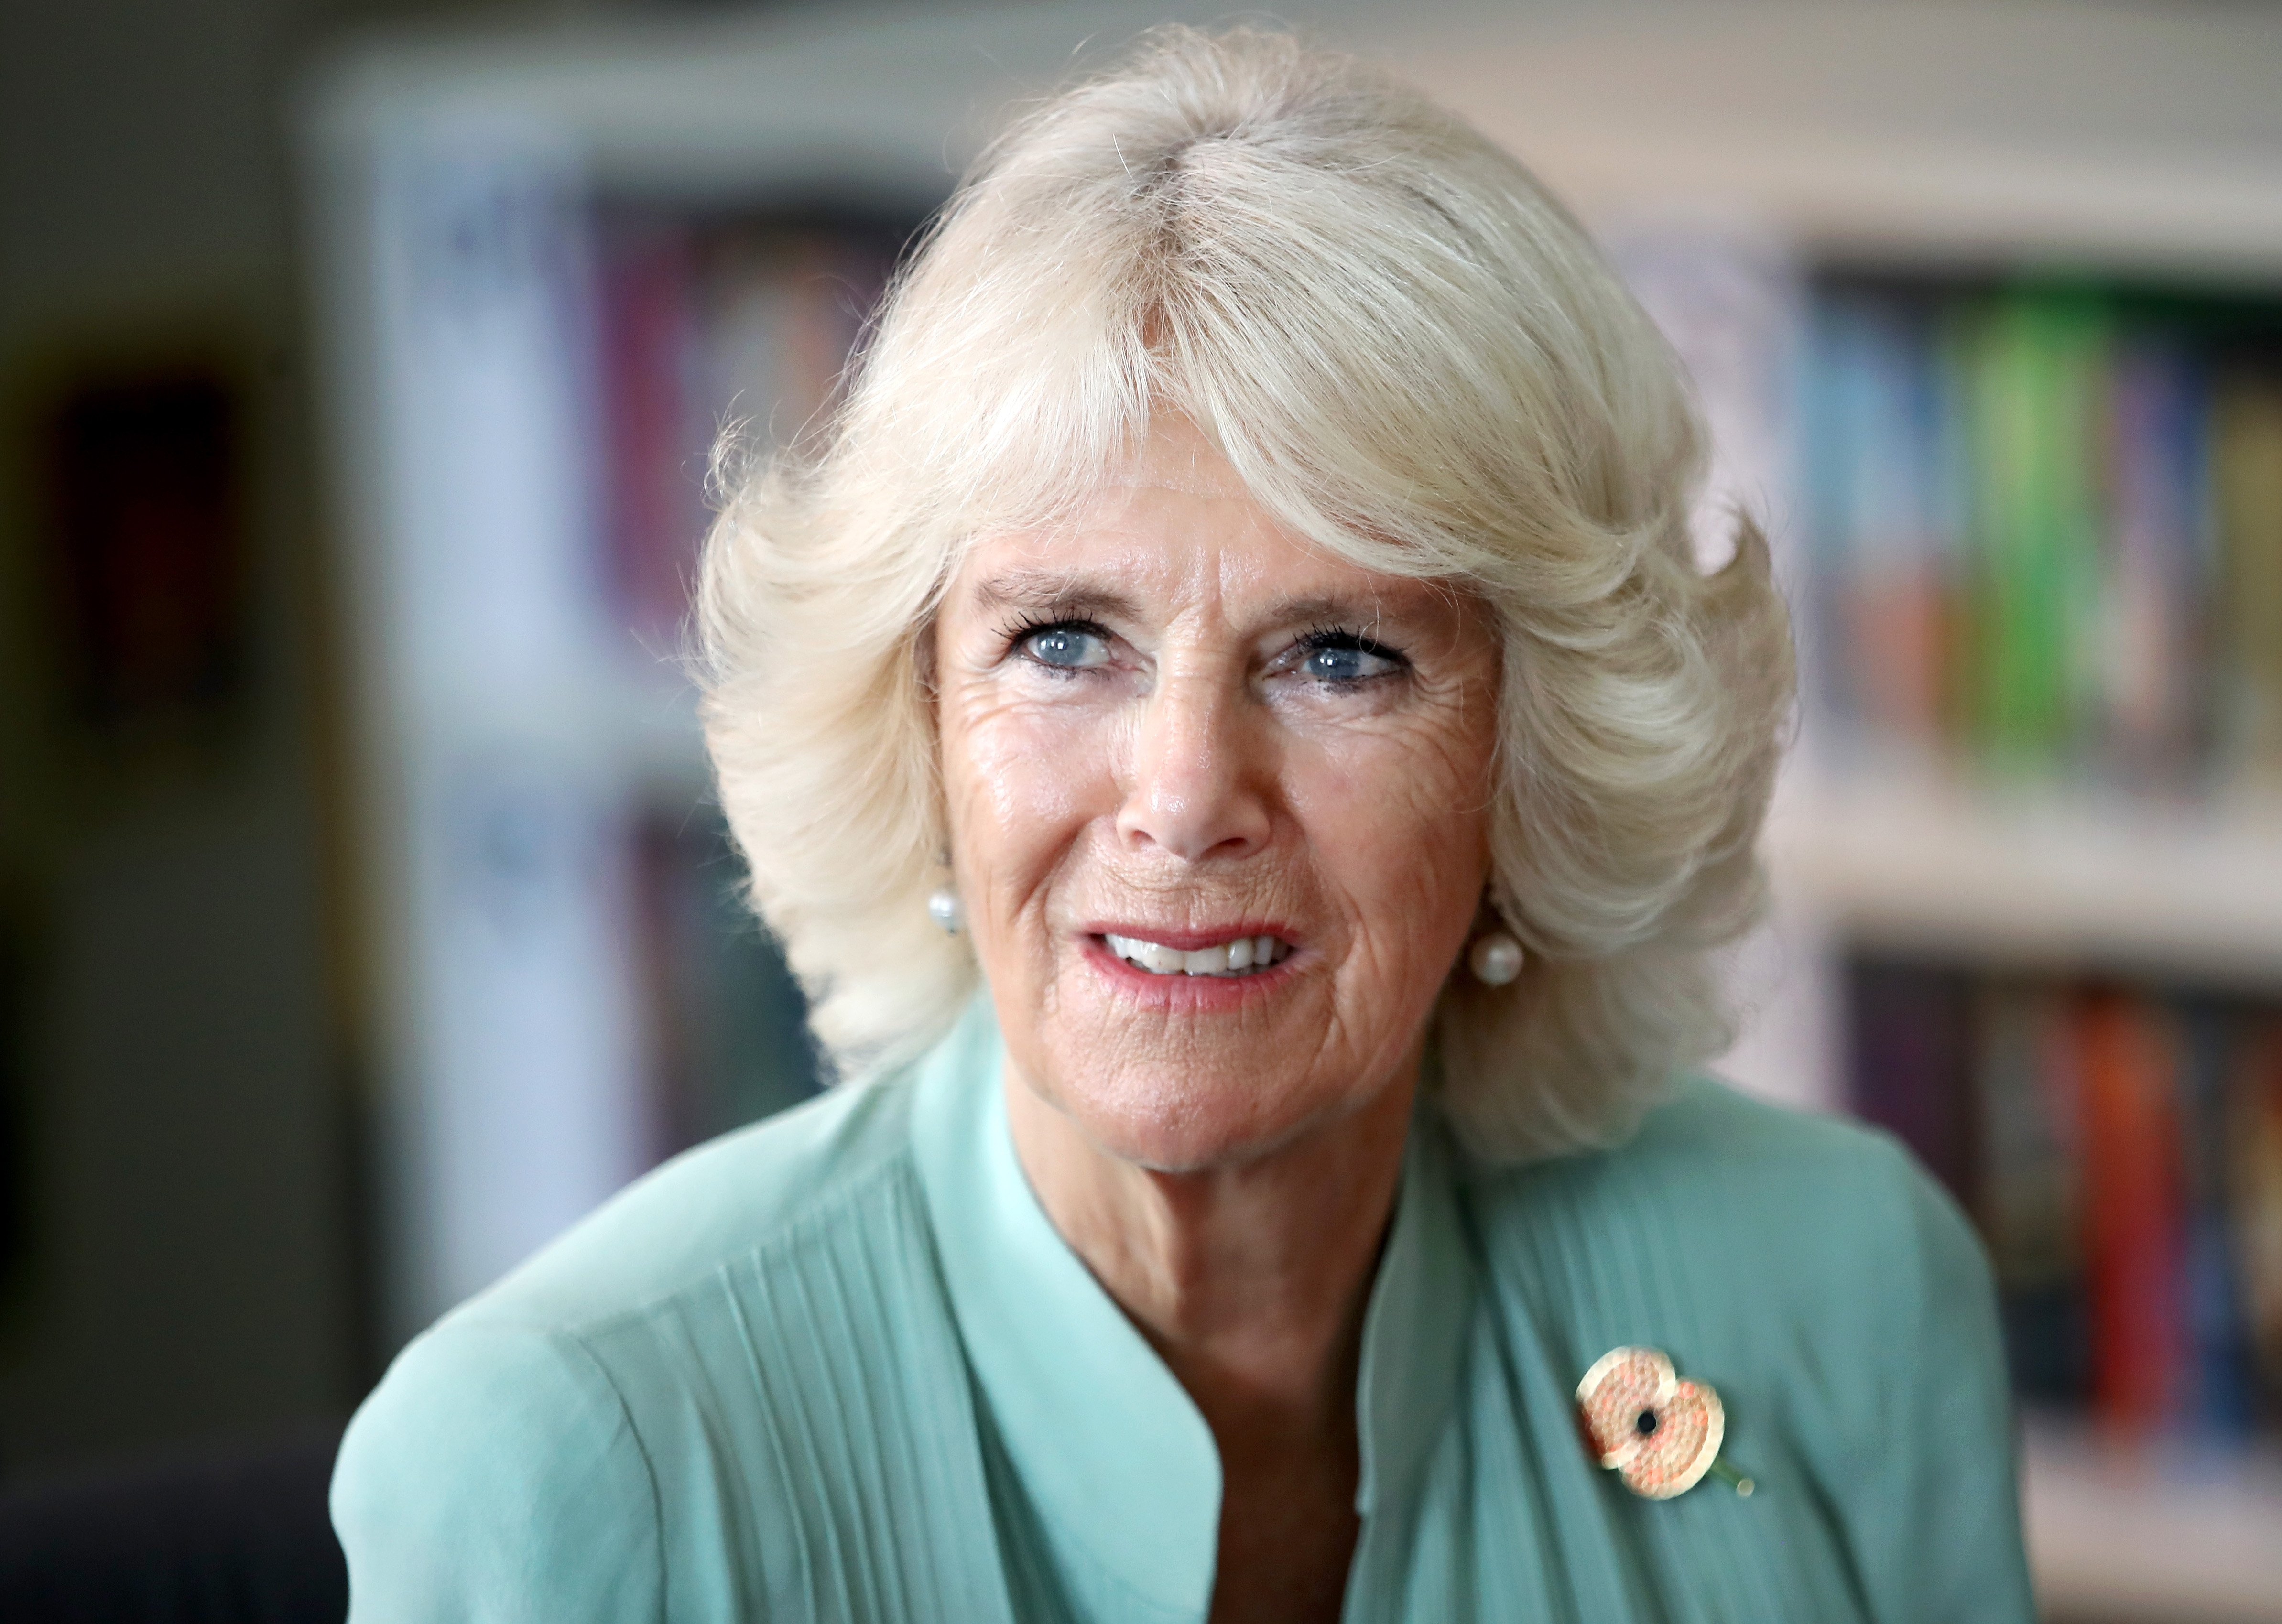 Camilla Parker Bowles | photo : Getty Images